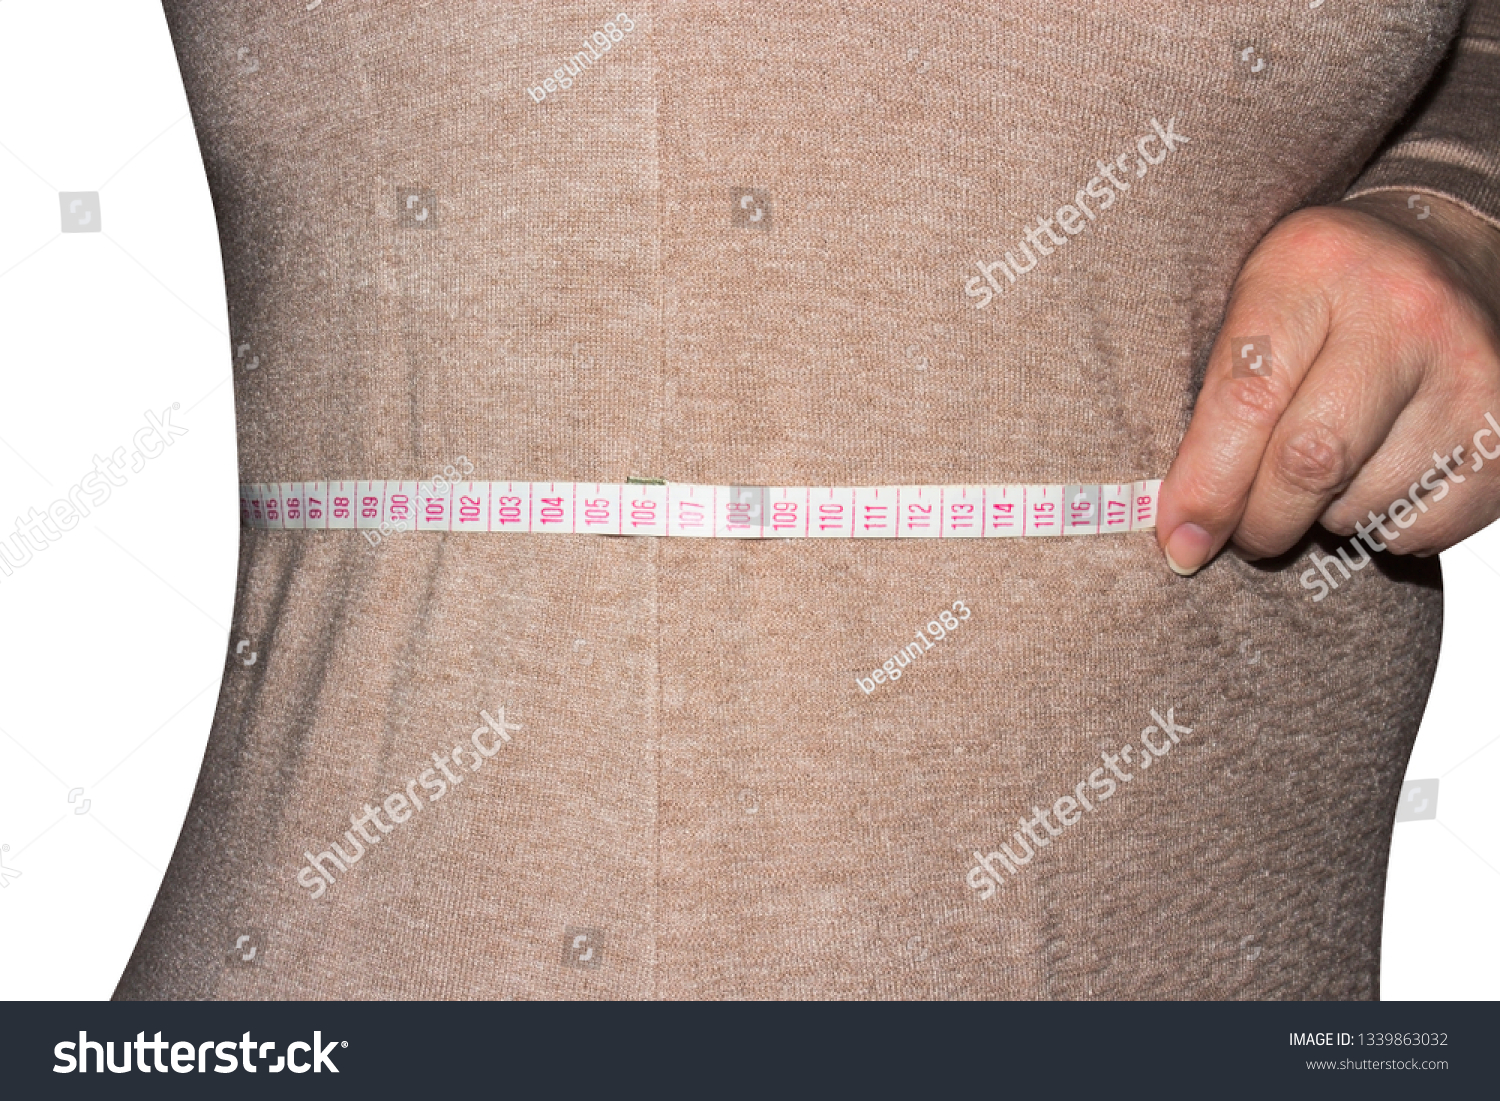 Woman measures waist size.The waist of a woman on a white background. #1339863032